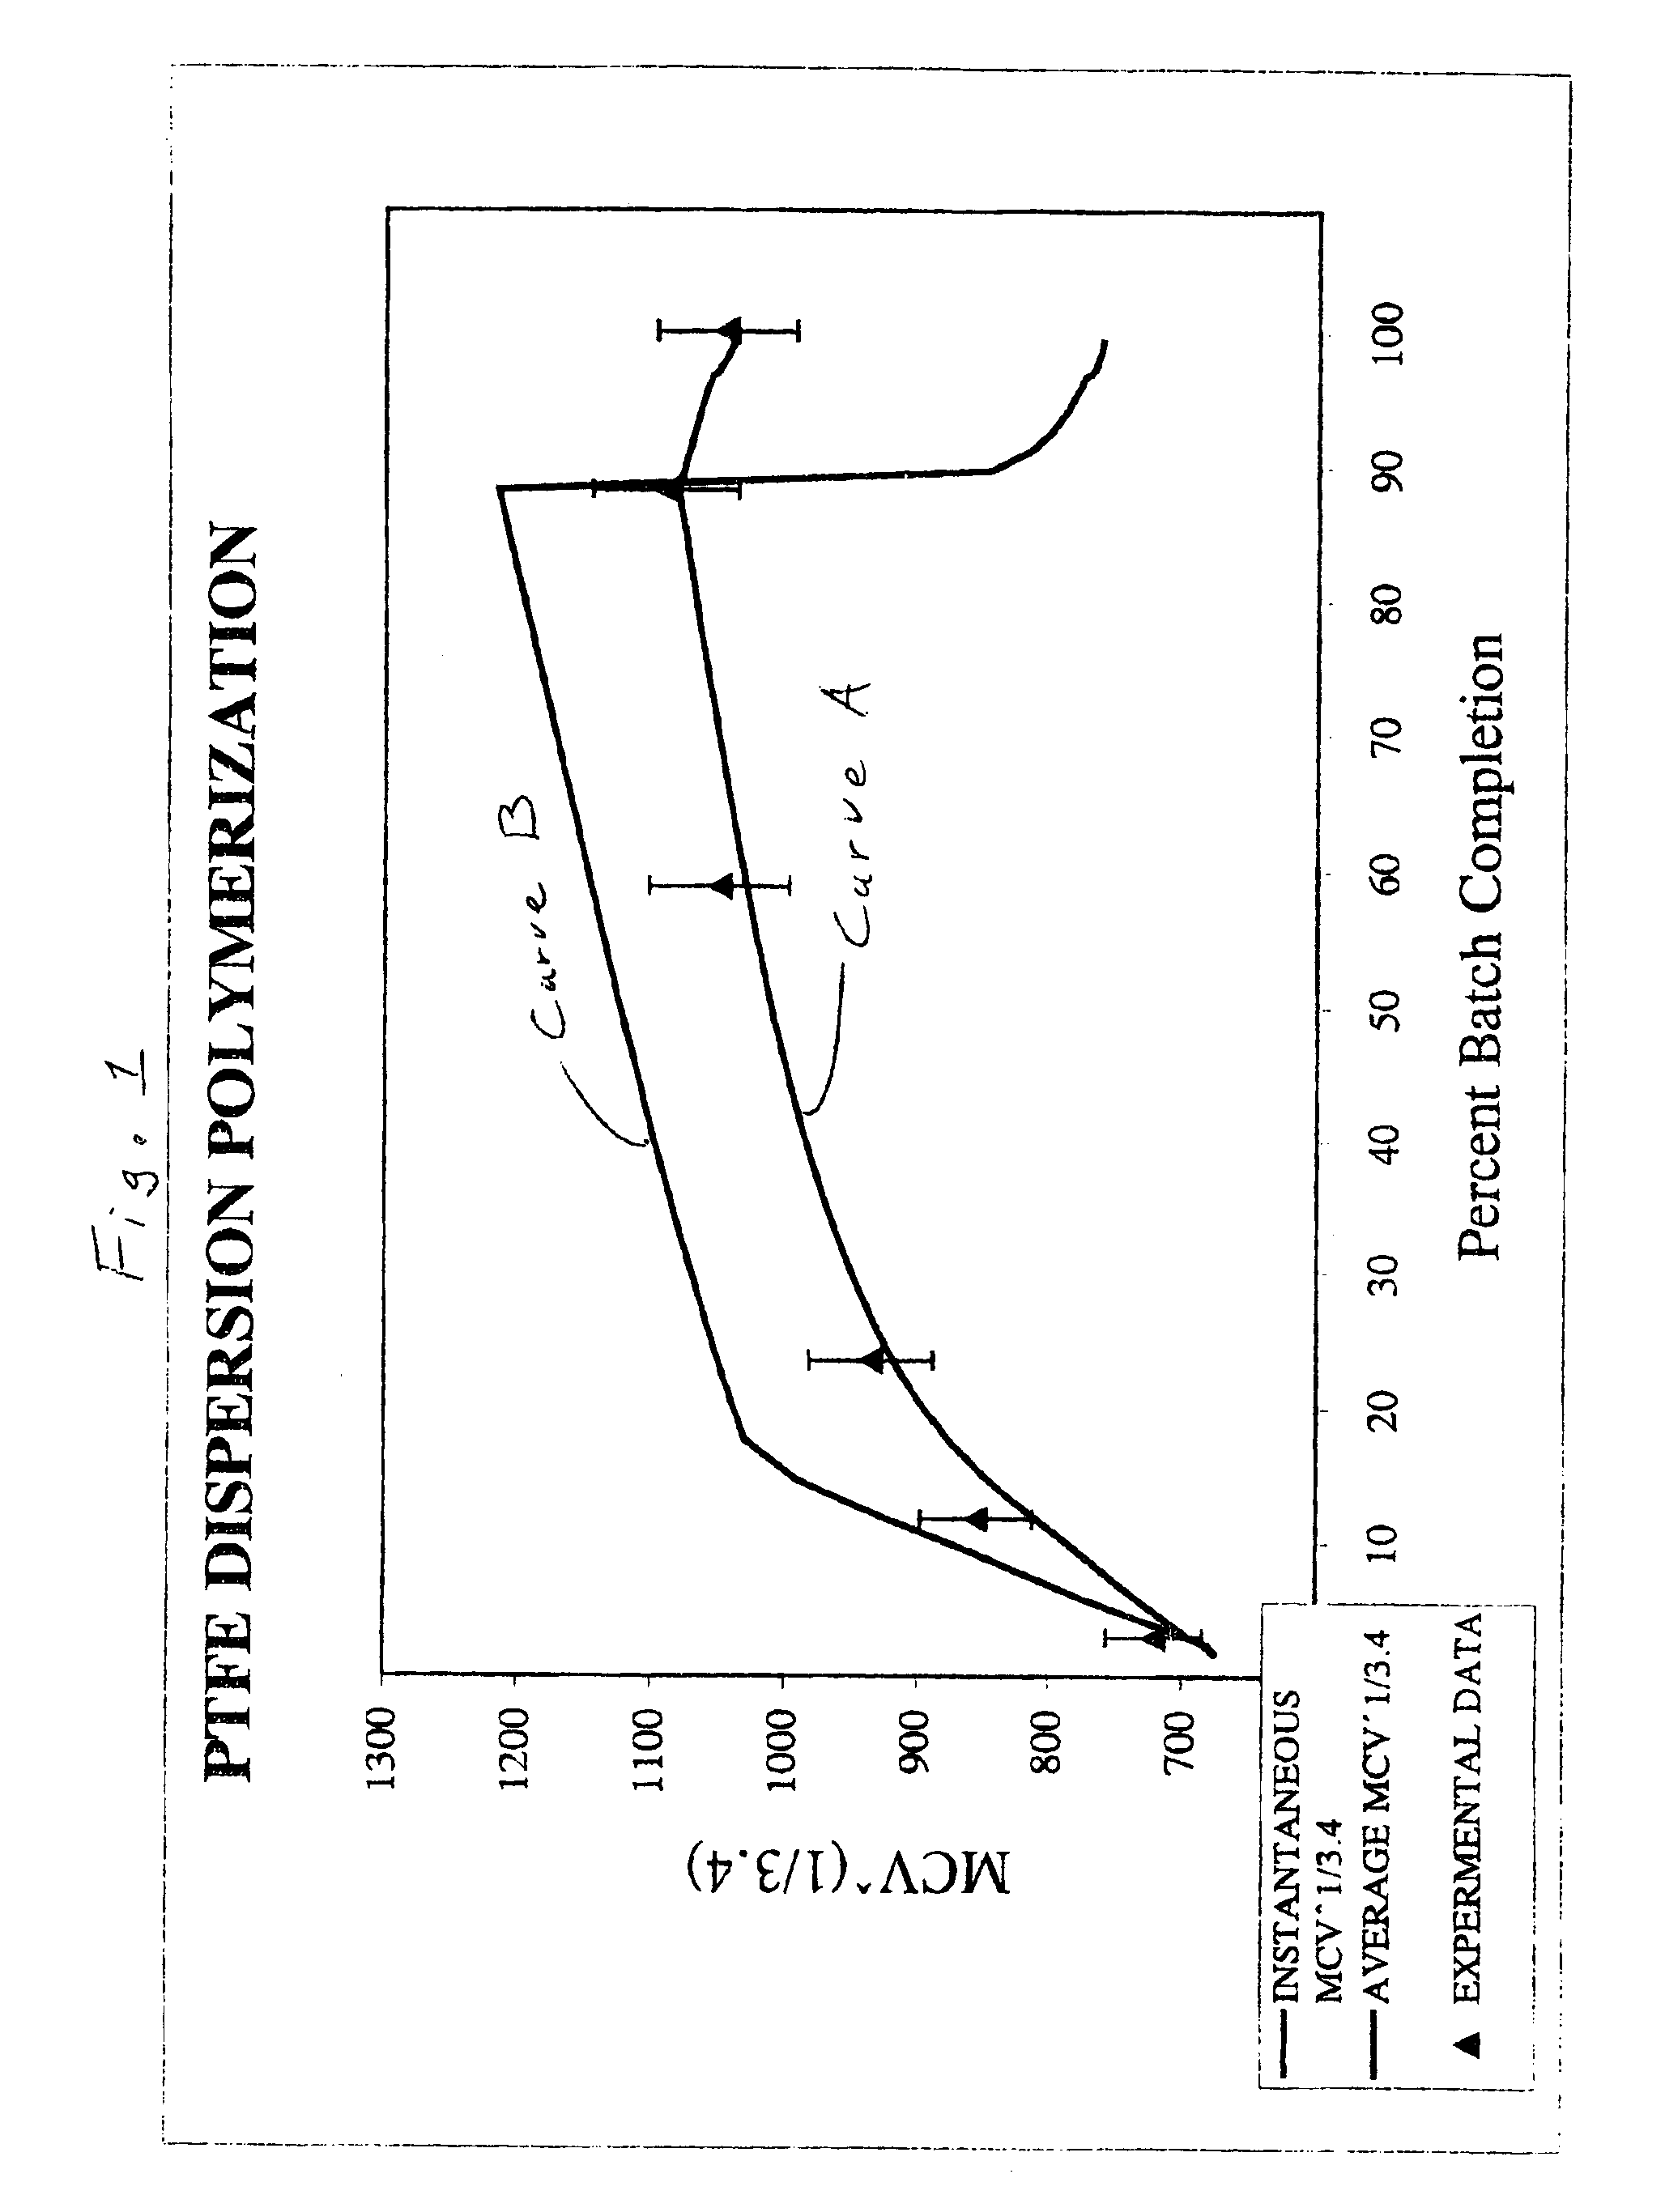 Concentrated fluoropolymer dispersions